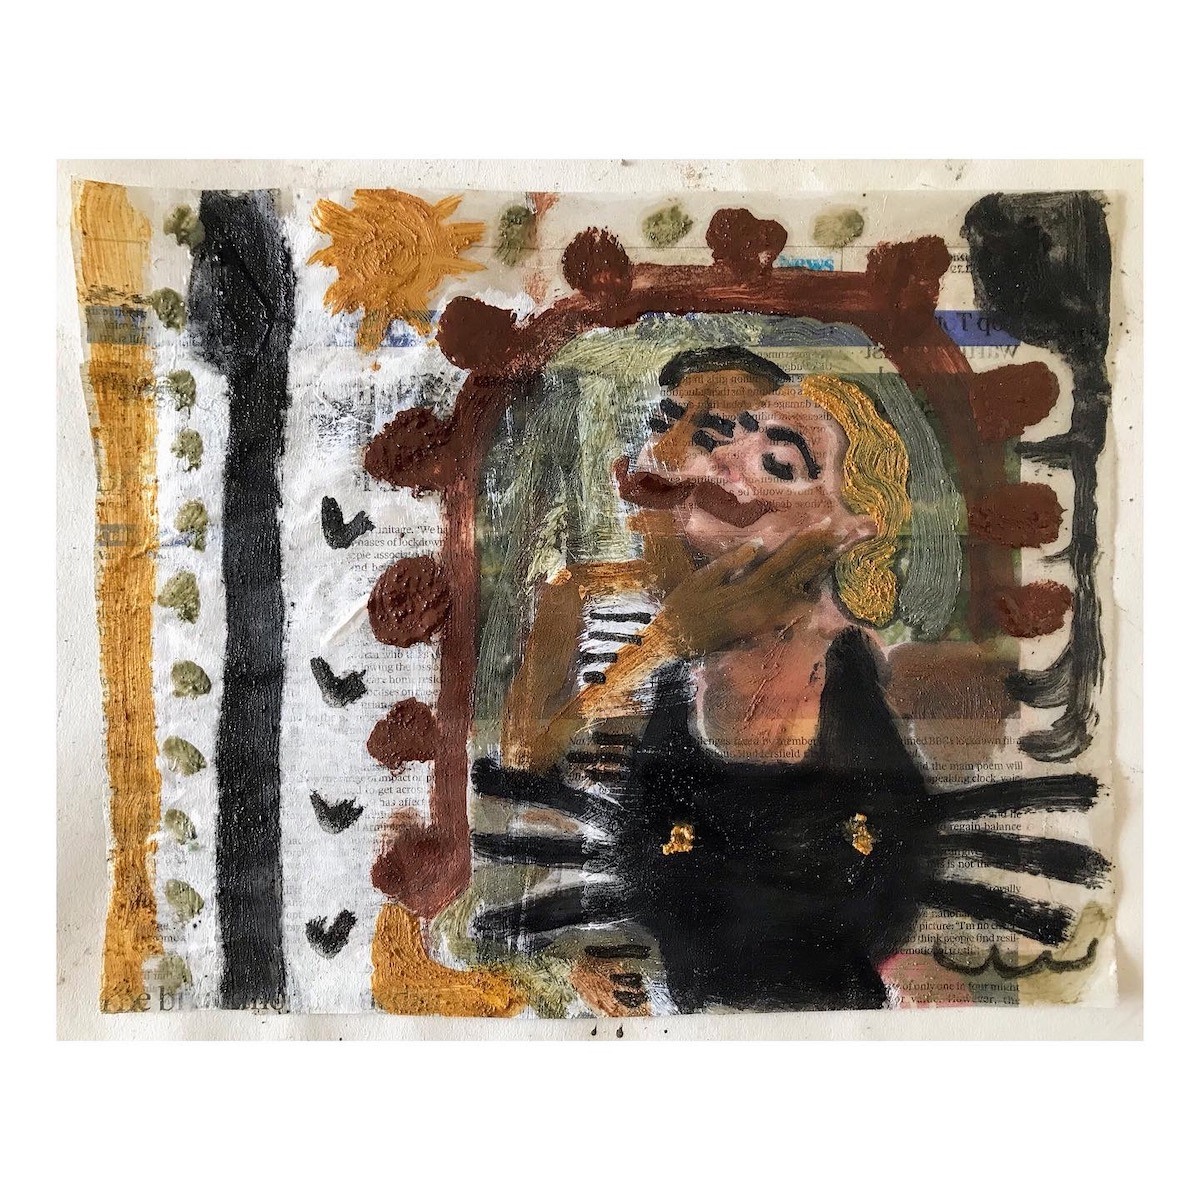 077-when-eyebrows-meet-Cornish-earth-pigments-and-linseed-oil-on-newspaper-25x20cm